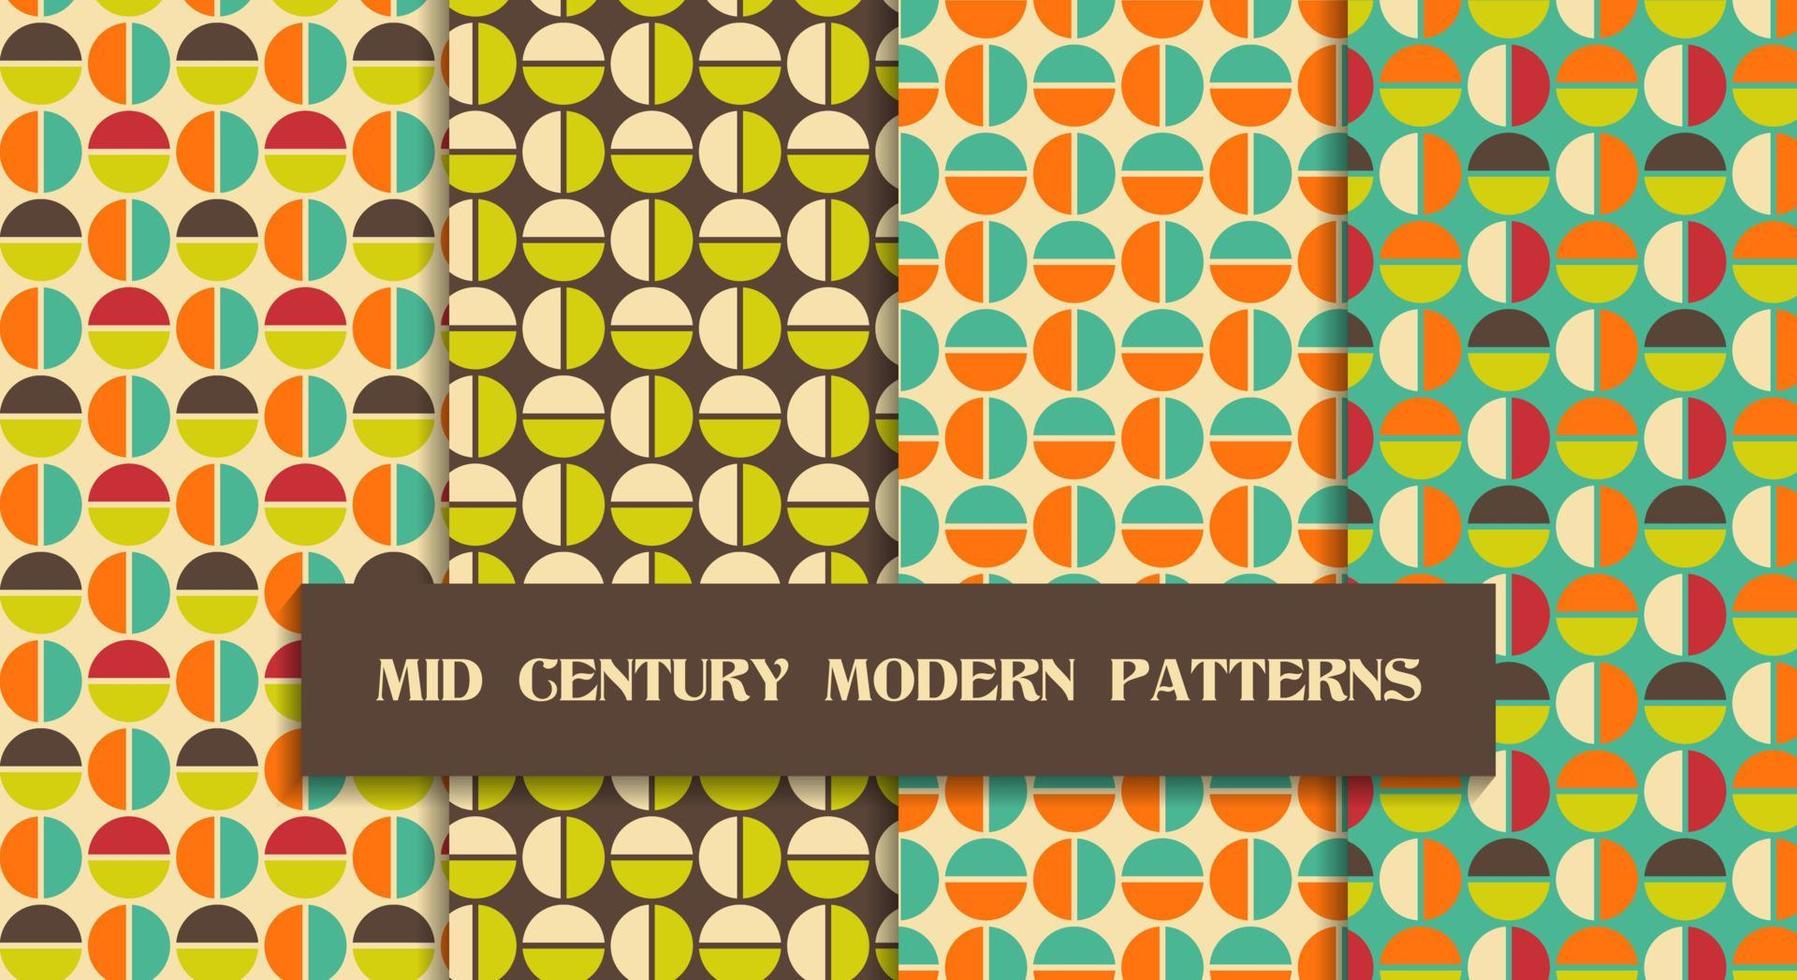 Mid century modern geometric patterns set. Half circle background for bedding, tablecloth, oilcloth or other textile design in retro style vector